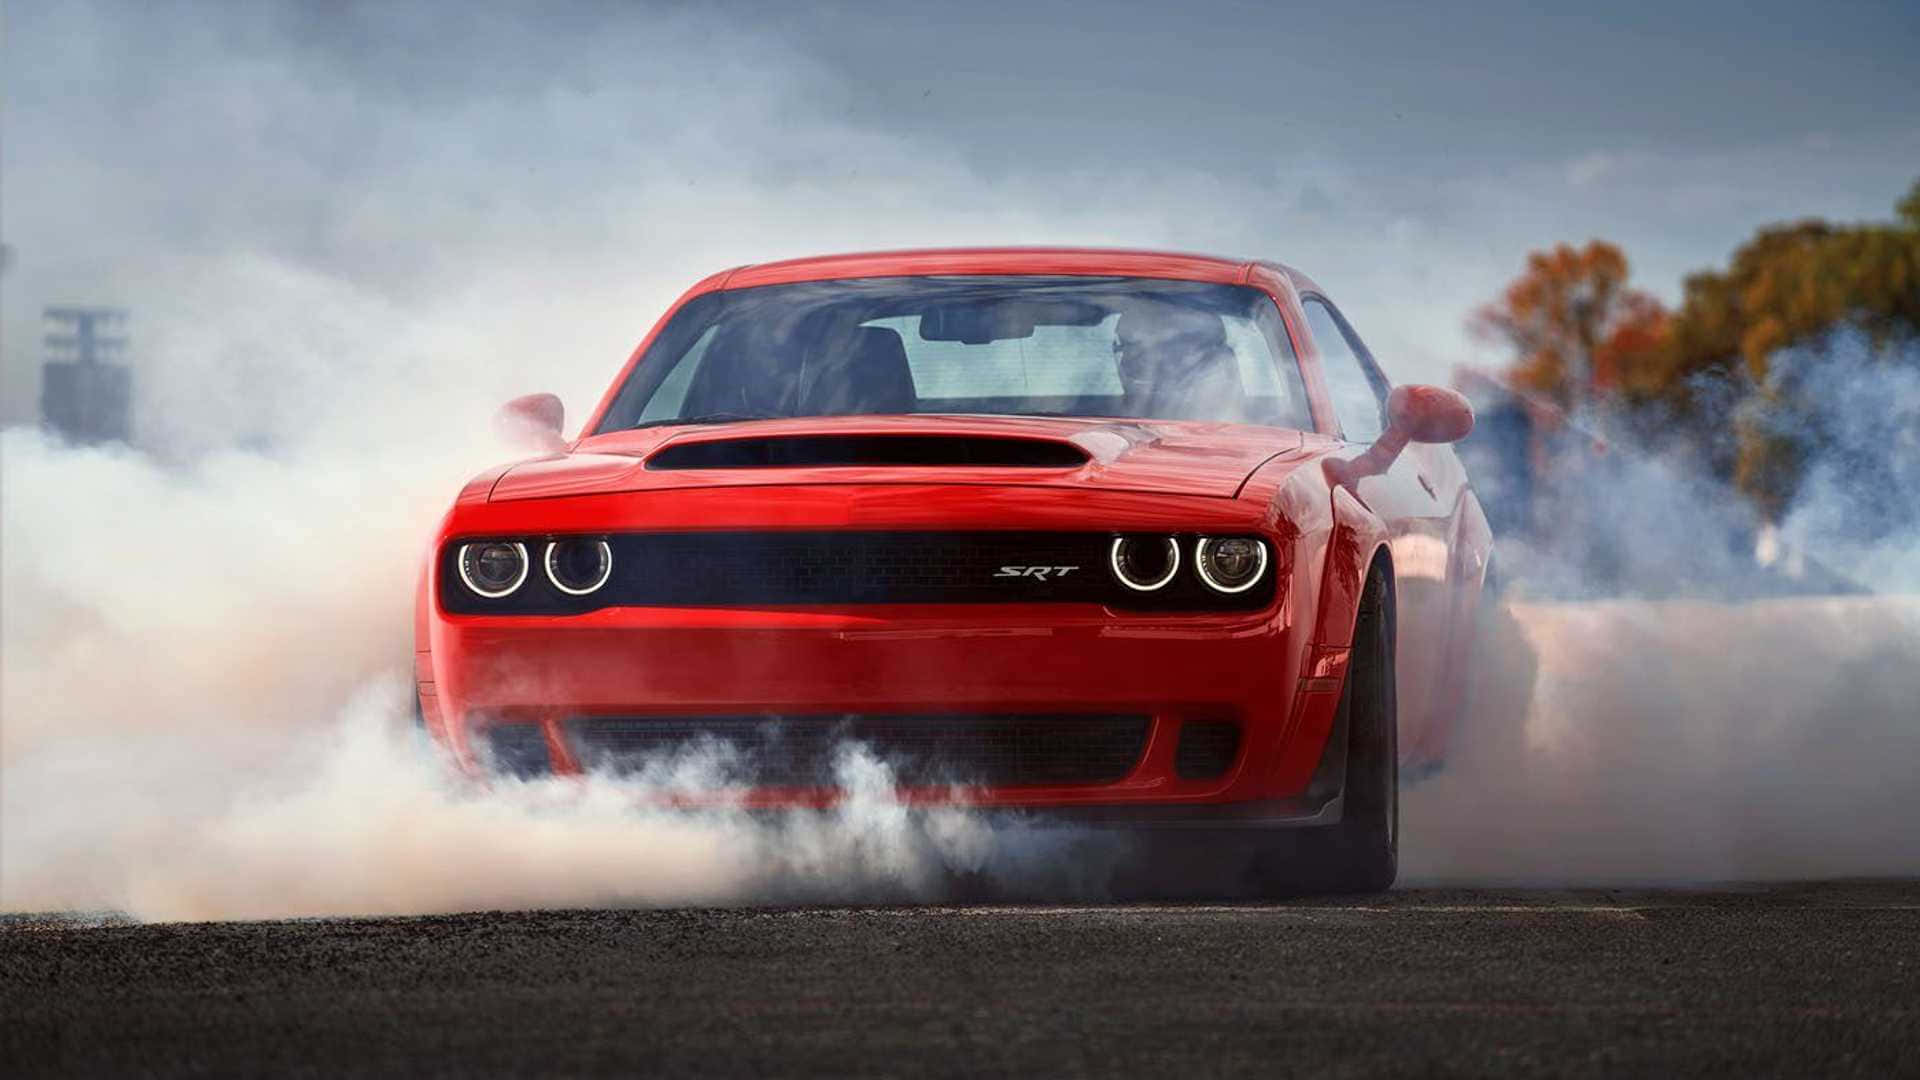 Dodge: Bold&Ready for Anything